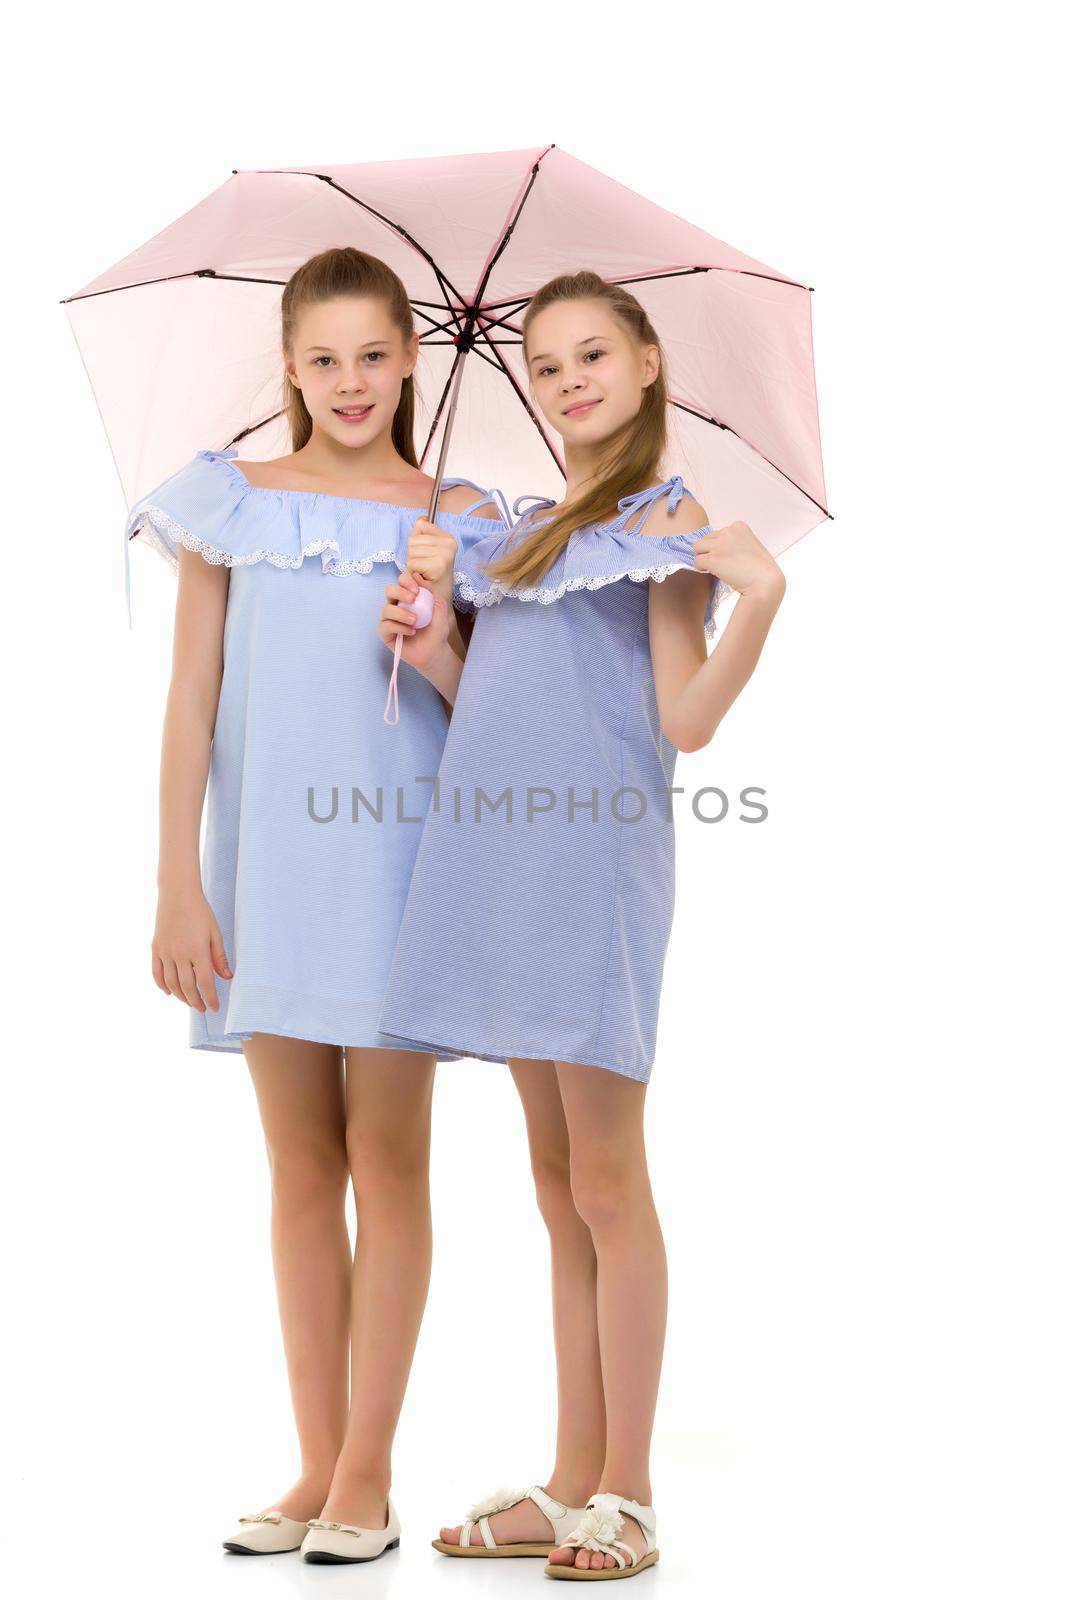 Two Cheerful Pretty Sisters in Identical Light Blue Dresses Standing Under Pink Umbrella, Beautiful Twin Girls in Fashionable Clothes Posing in Studio Against White Background